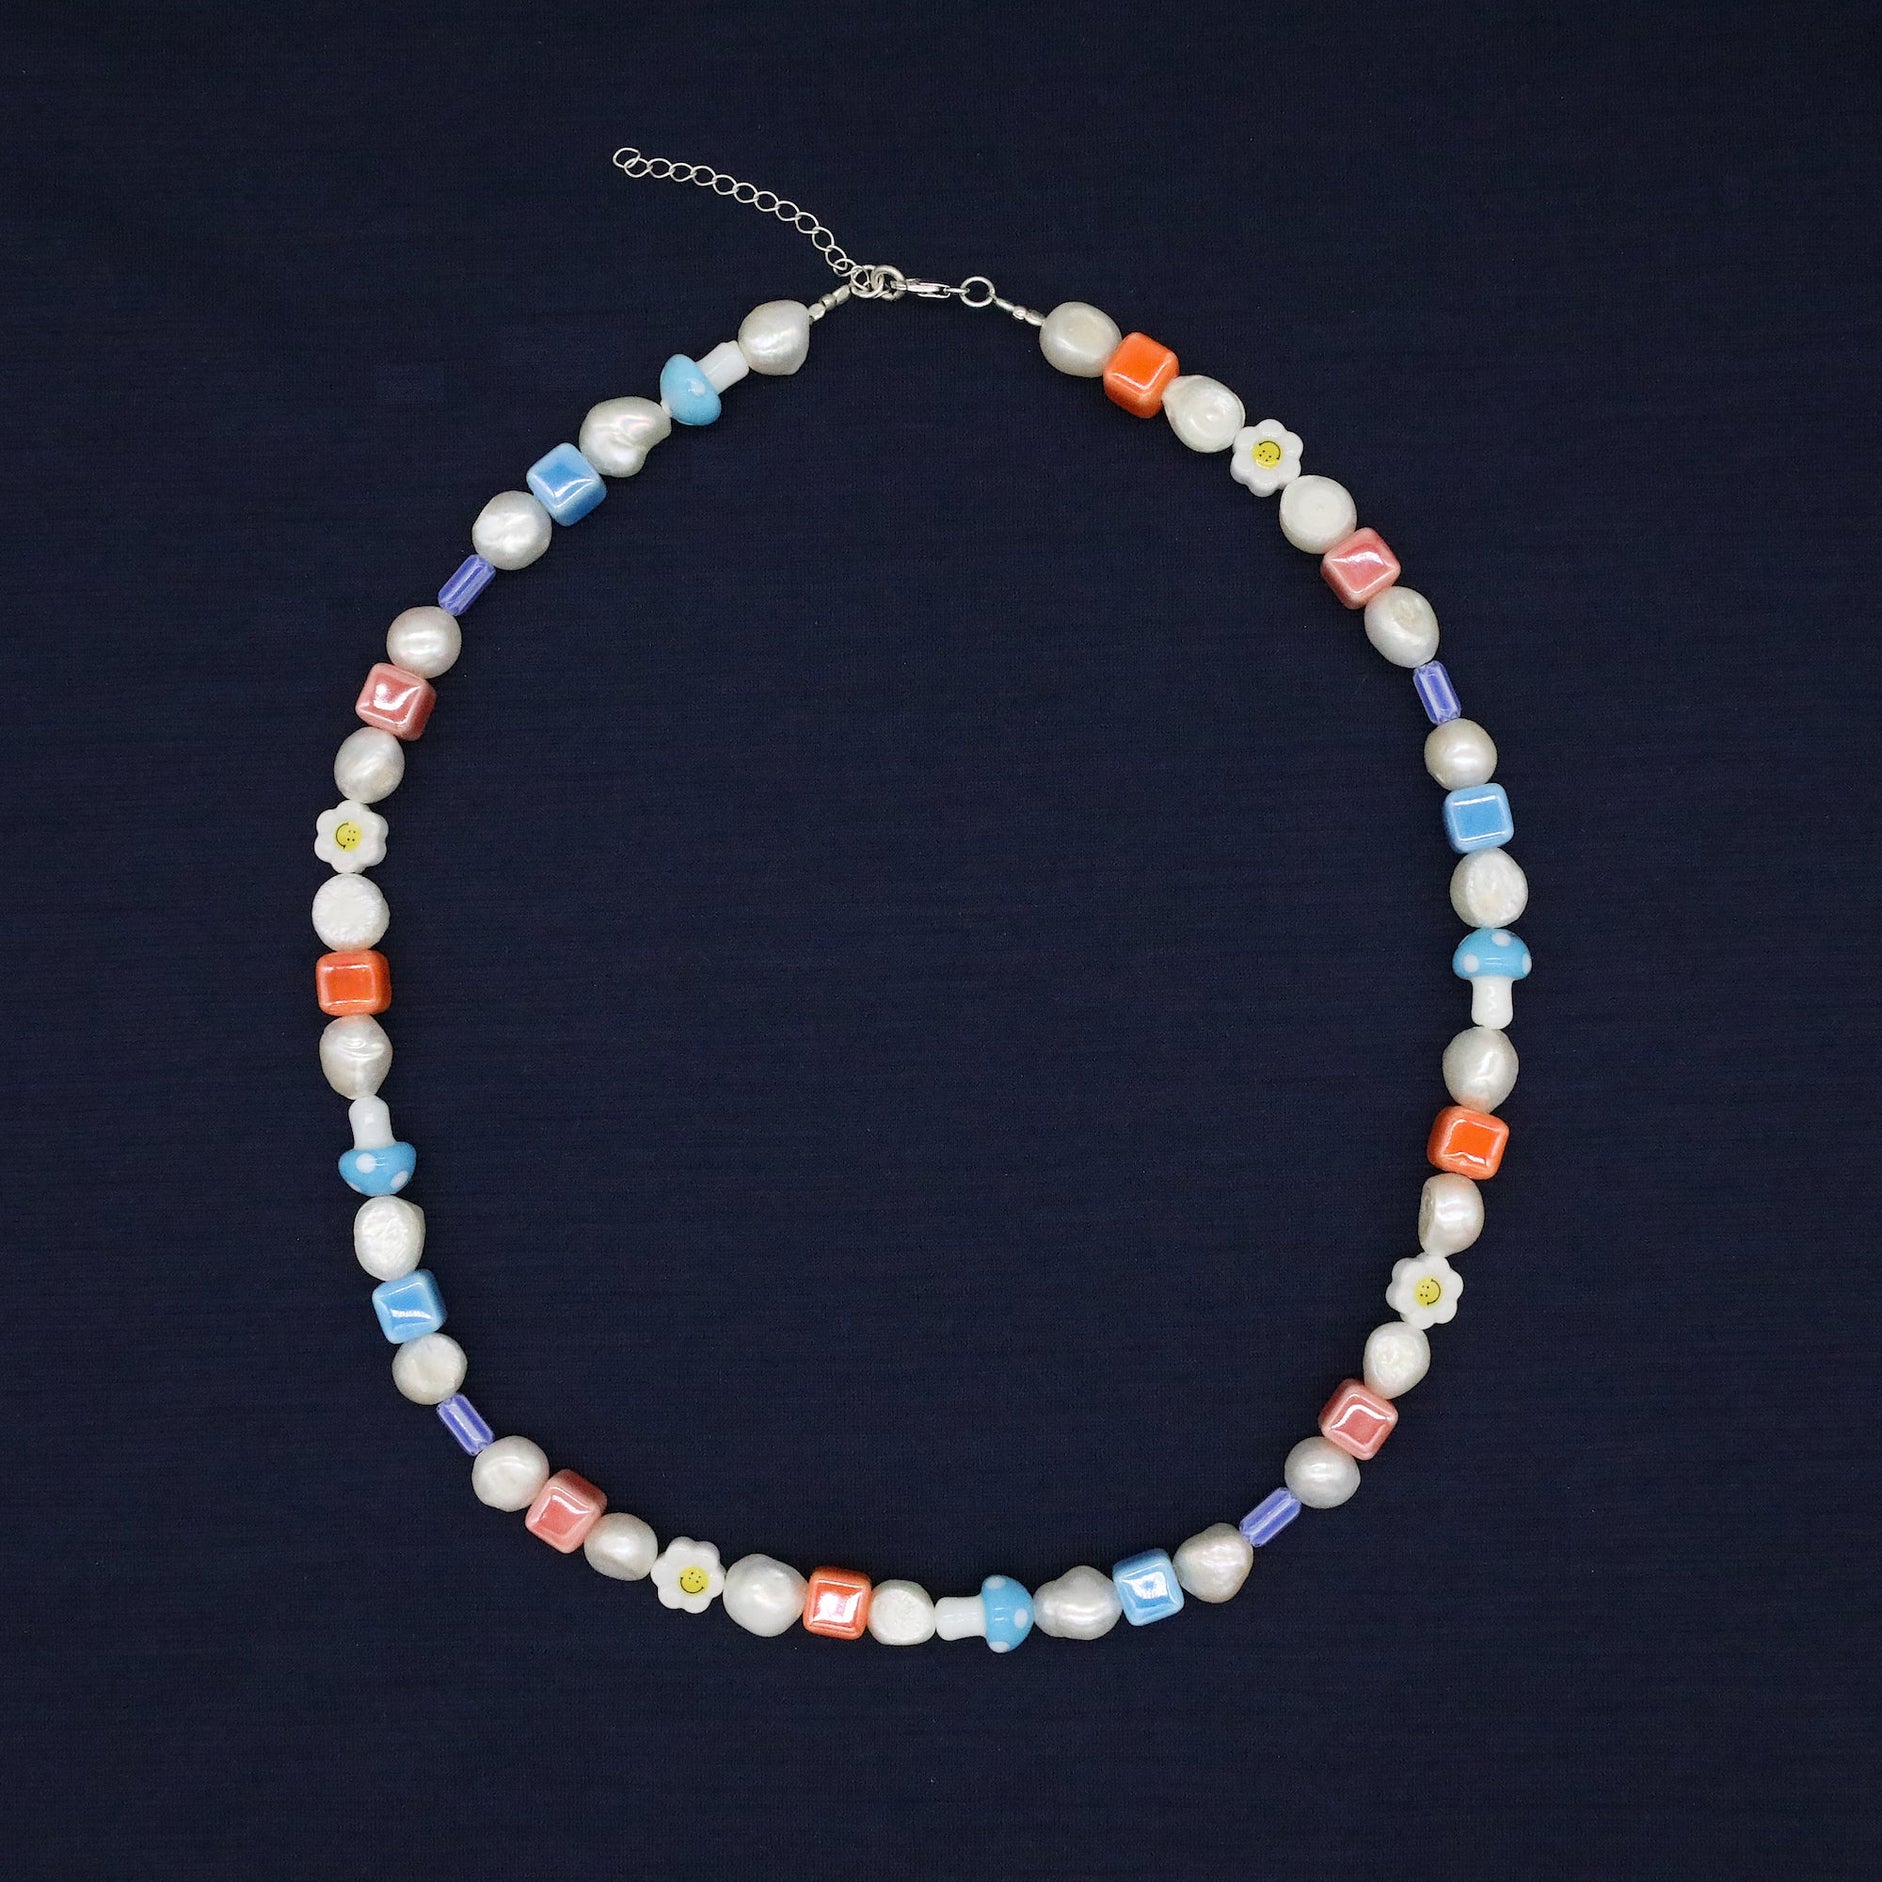 Maxi Necklace With Freshwater Pearls And Glass Beads-Necklace-Kompsós